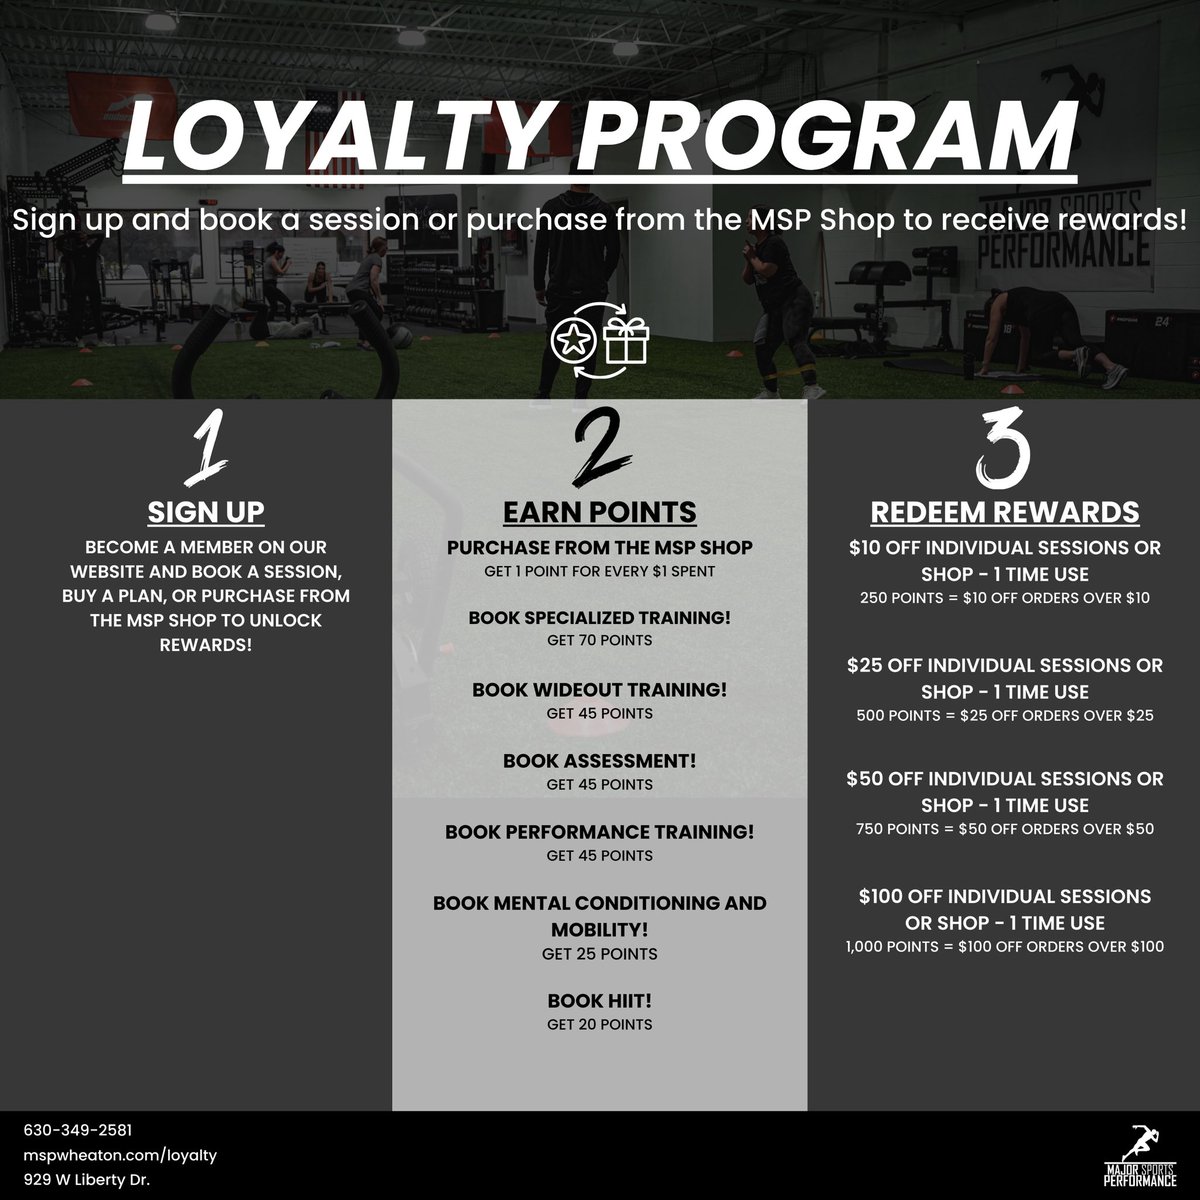 💥Exciting Announcement!💥 Join the Major Sports Performance Loyalty Program today at mspwheaton.com/loyalty and unlock a world of rewards! 🏆 And to all our loyal athletes, we want to say a huge THANK YOU for your support and dedication!